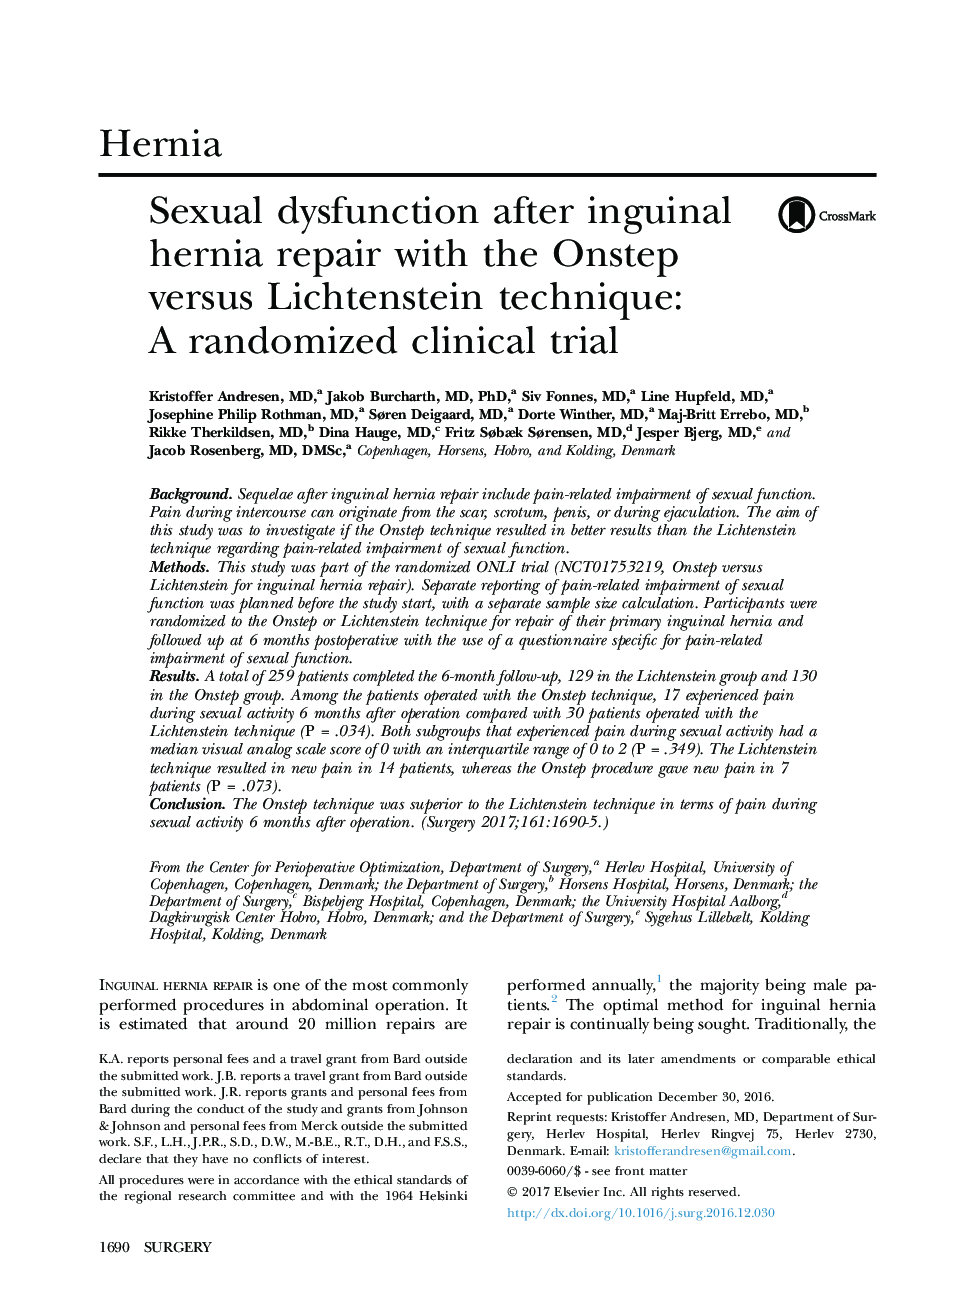 HerniaSexual dysfunction after inguinal hernia repair with the Onstep versus Lichtenstein technique: AÂ randomized clinical trial